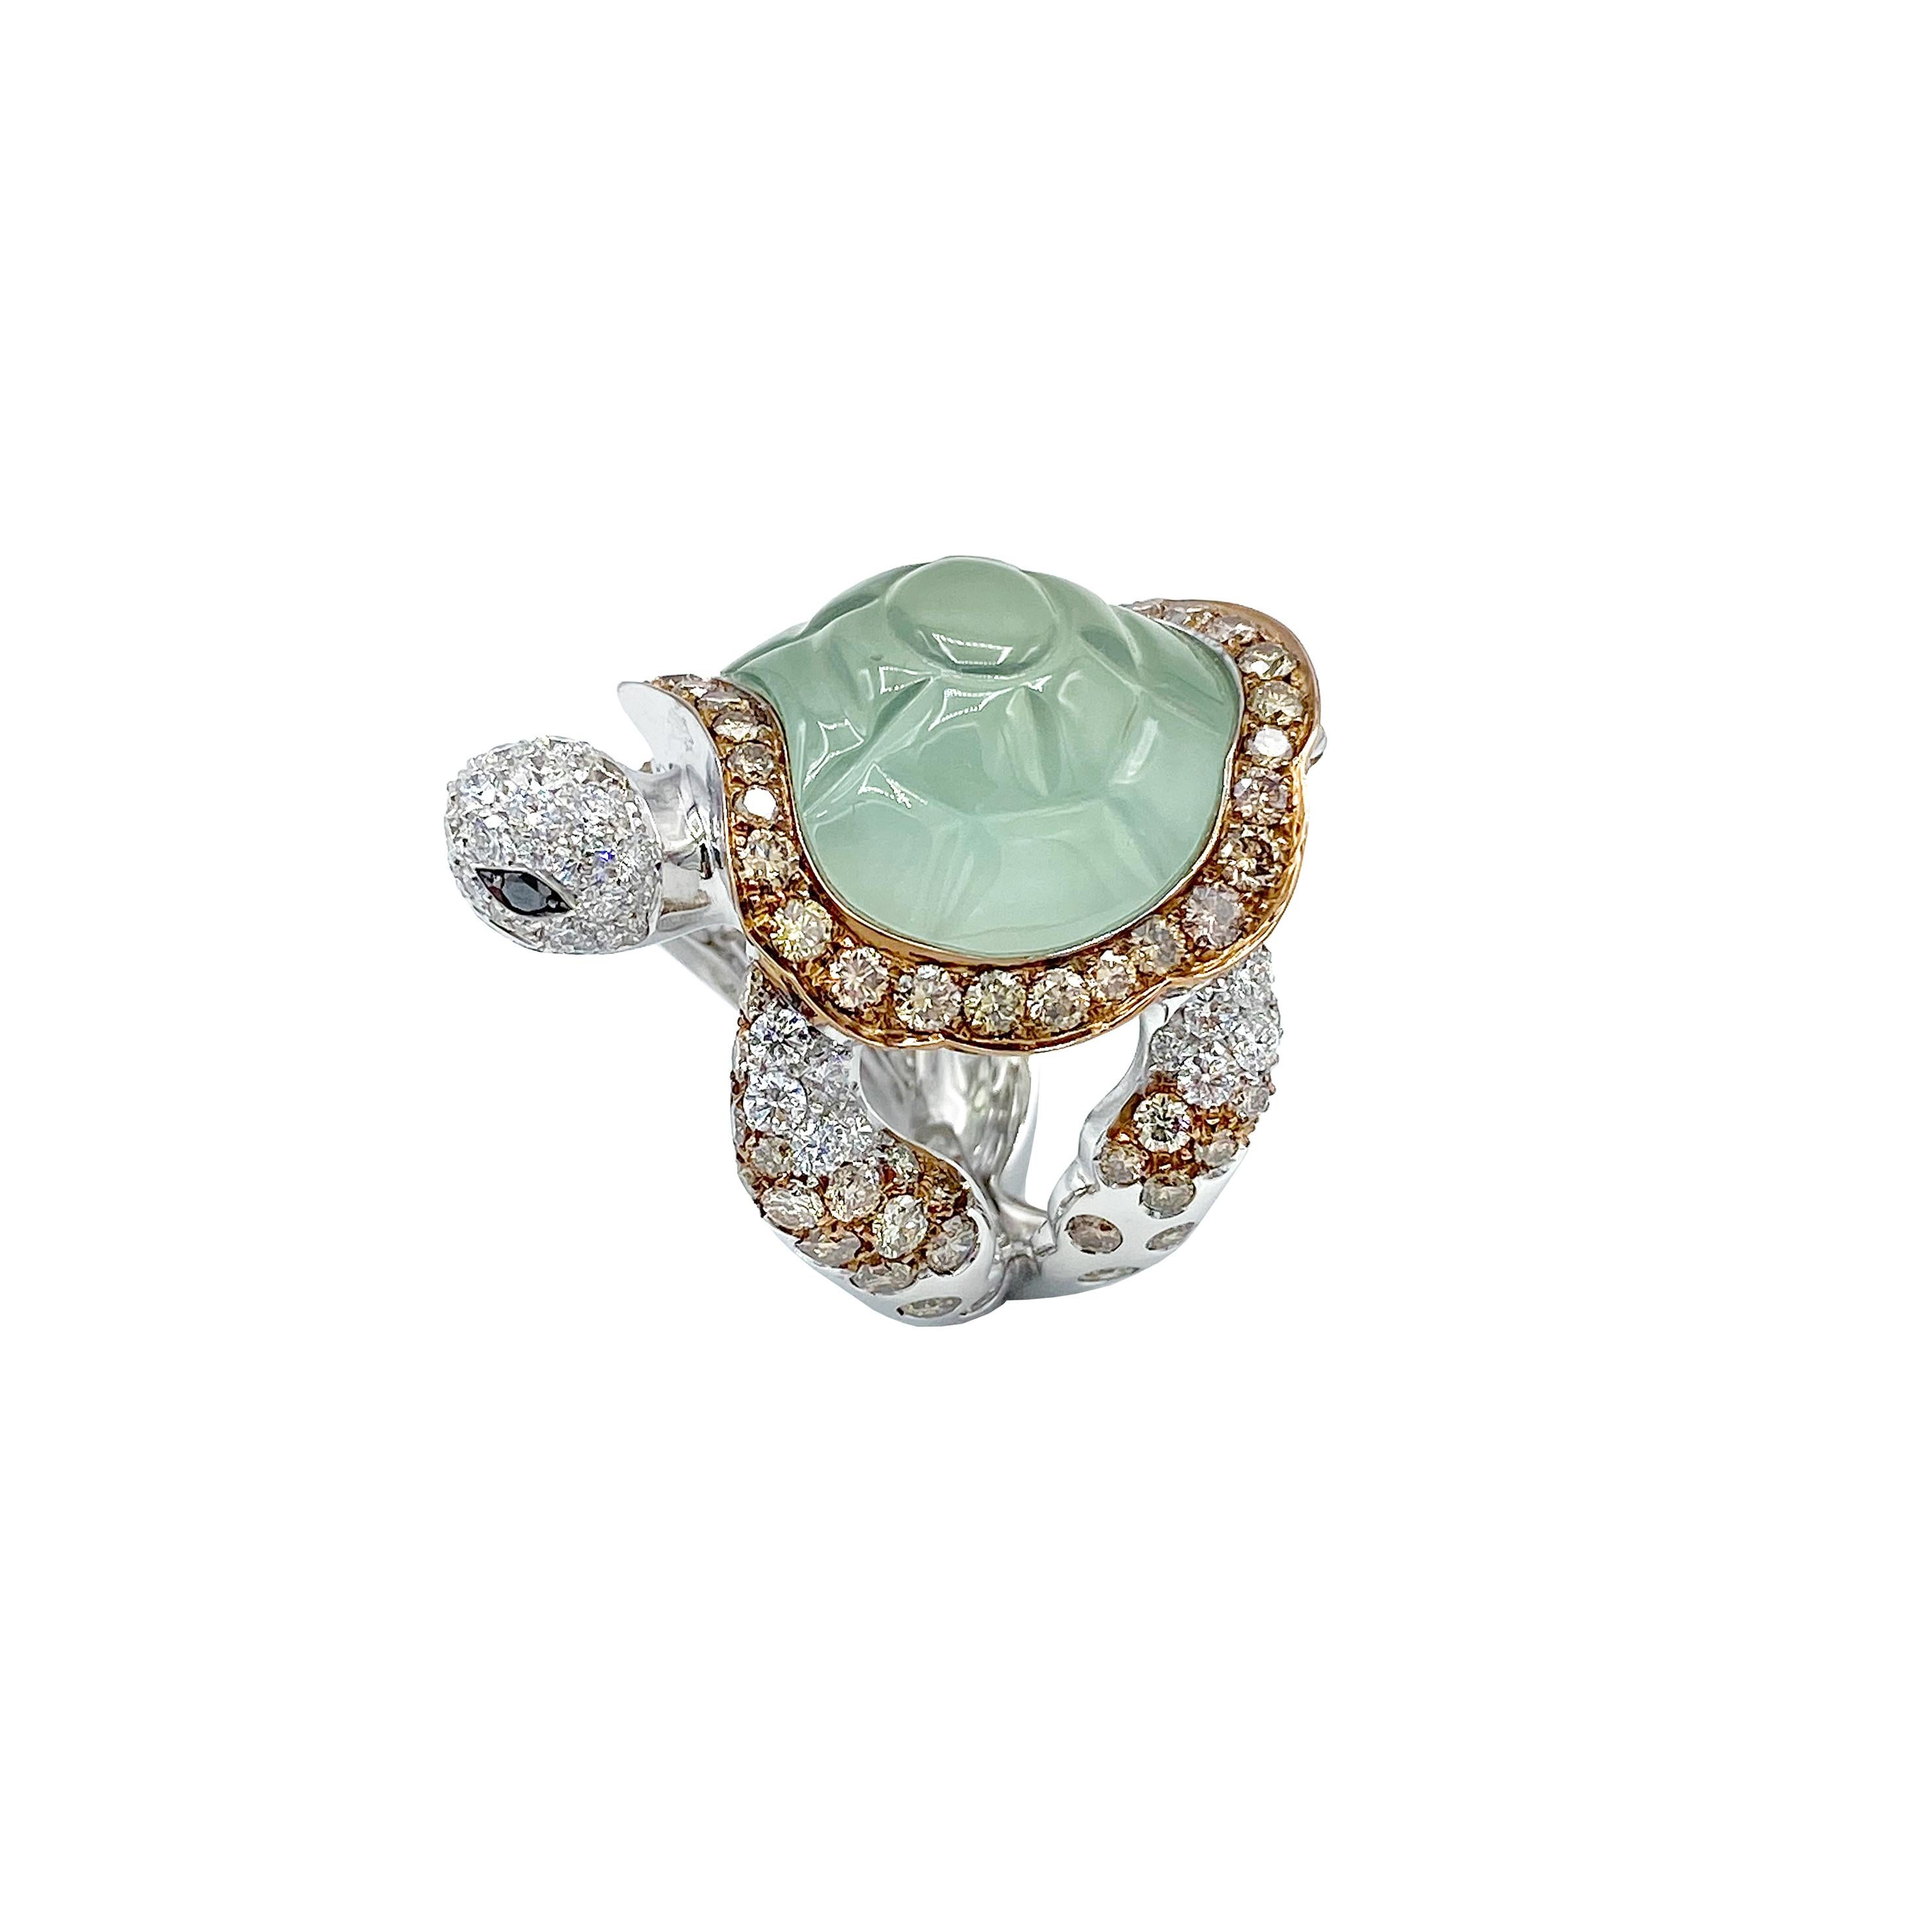 This is a very beautiful white gold ring with white, brown and black (their eyes) diamonds.
The 'armour' of the carapace is a sage green hard rock called Prehnite, cut and engraved by hand.
The total carat is 5,83 ct.
The size of the ring is 6 1/4